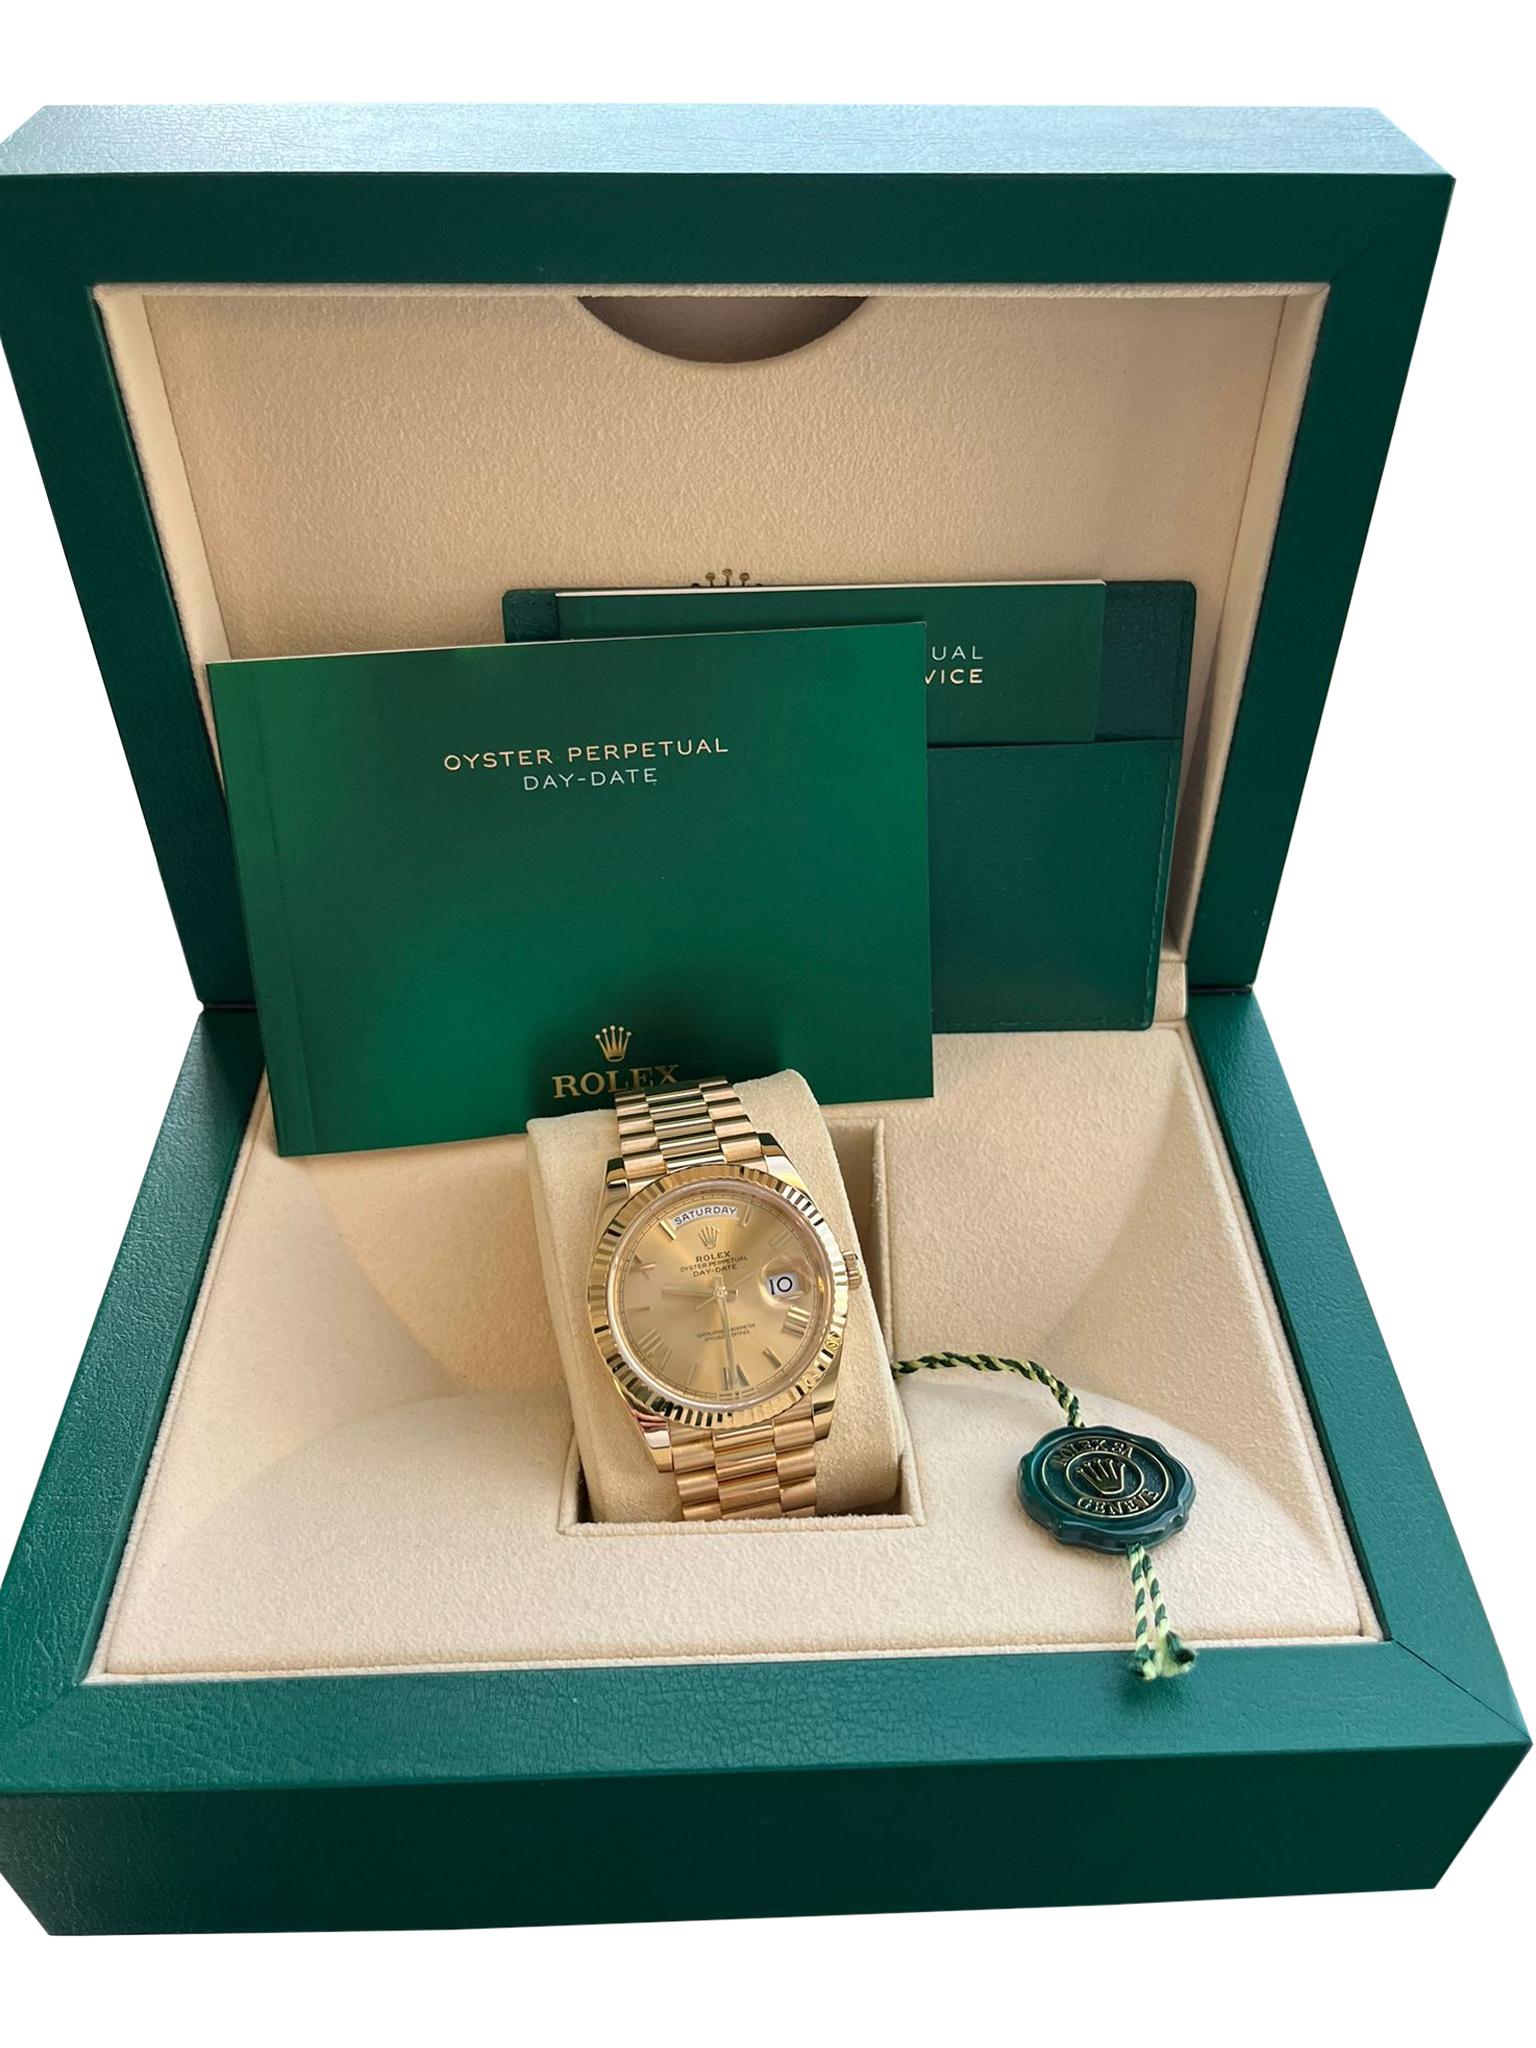 The Oyster Perpetual Day-Date 40 in 18 ct yellow gold with a champagne-color dial, fluted bezel, and a President bracelet. The Rolex fluted bezel is a mark of distinction. Originally, the fluting of the Oyster bezel had a functional purpose: it